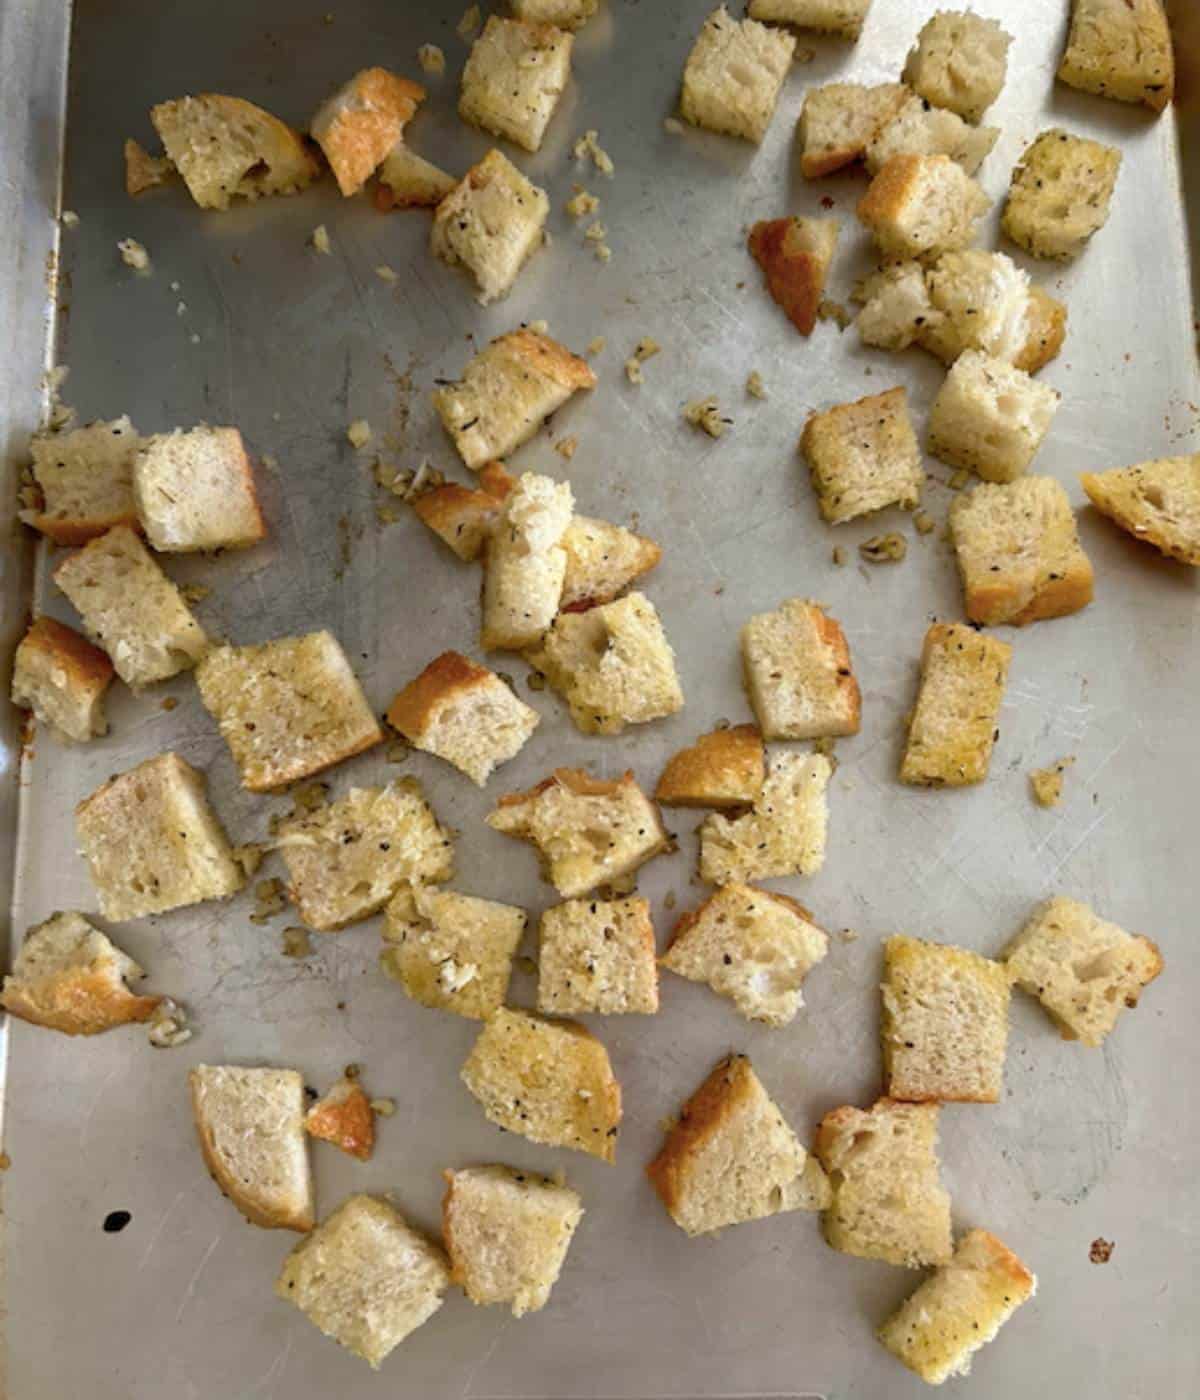 Soup croutons tossed in garlic butter on cookie sheet.